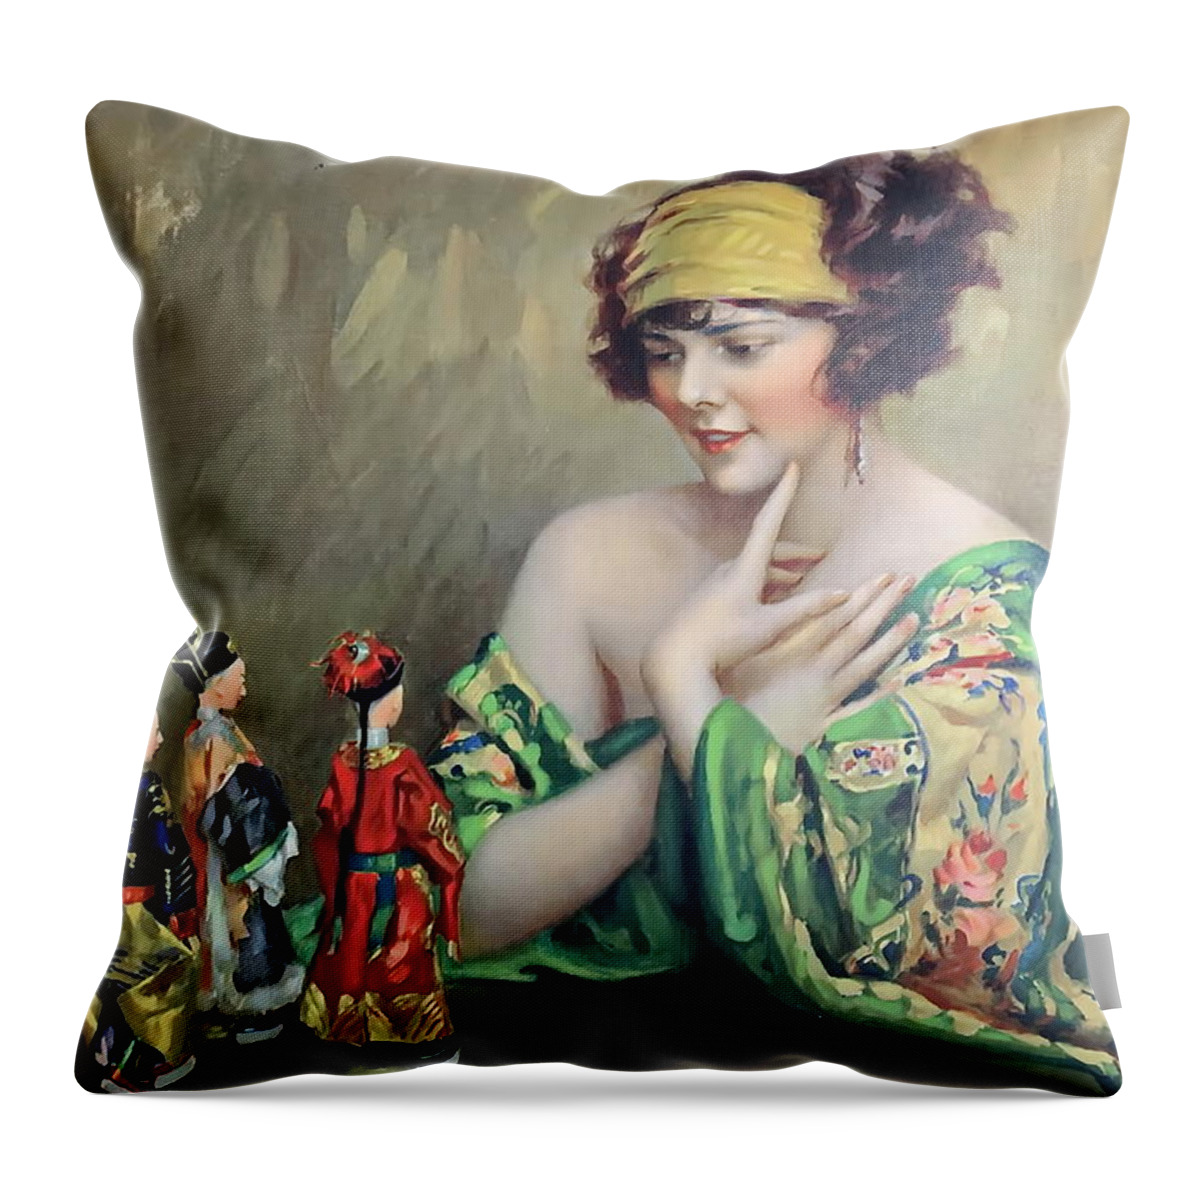 Orientalist Throw Pillow featuring the photograph The Flapper by Andrea Kollo